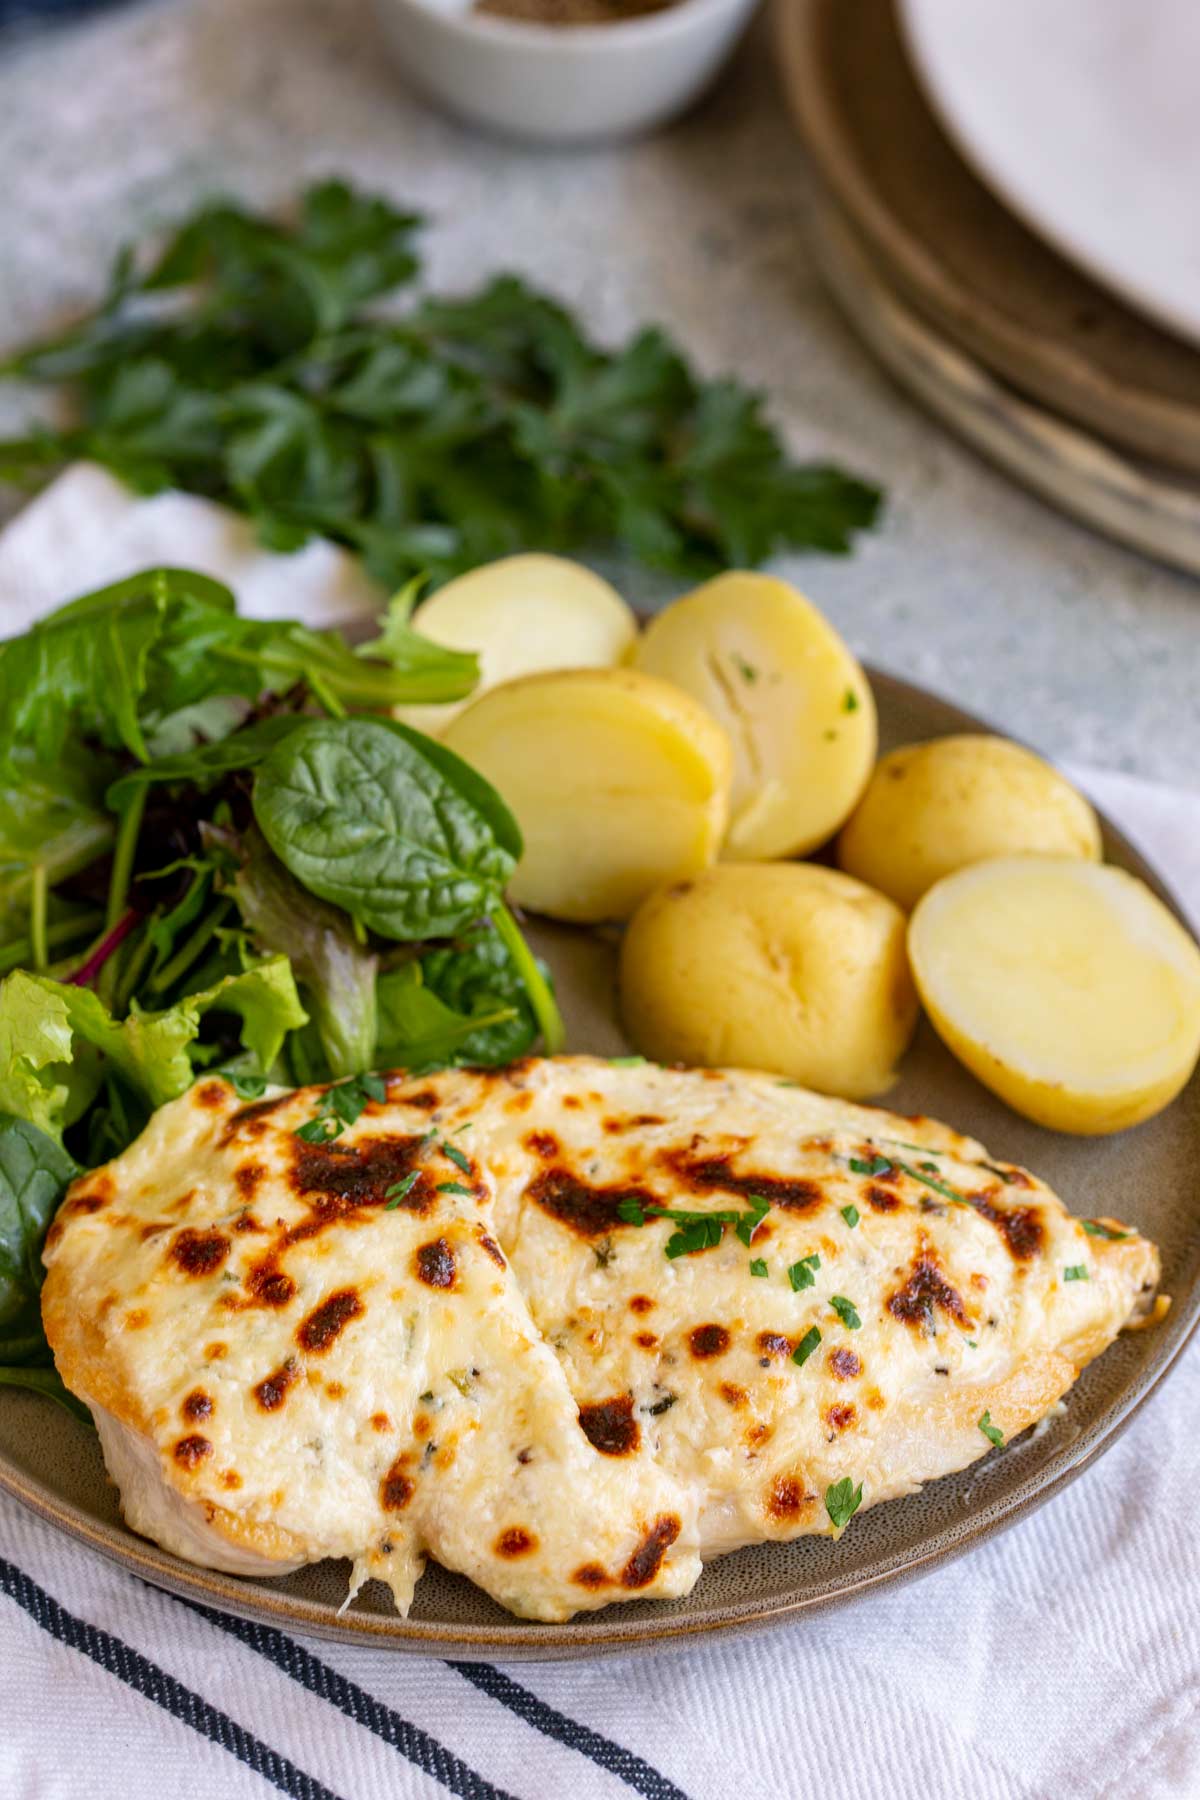 a chicken breast covered in a cheesy sauce on a plate with potatoes and salad